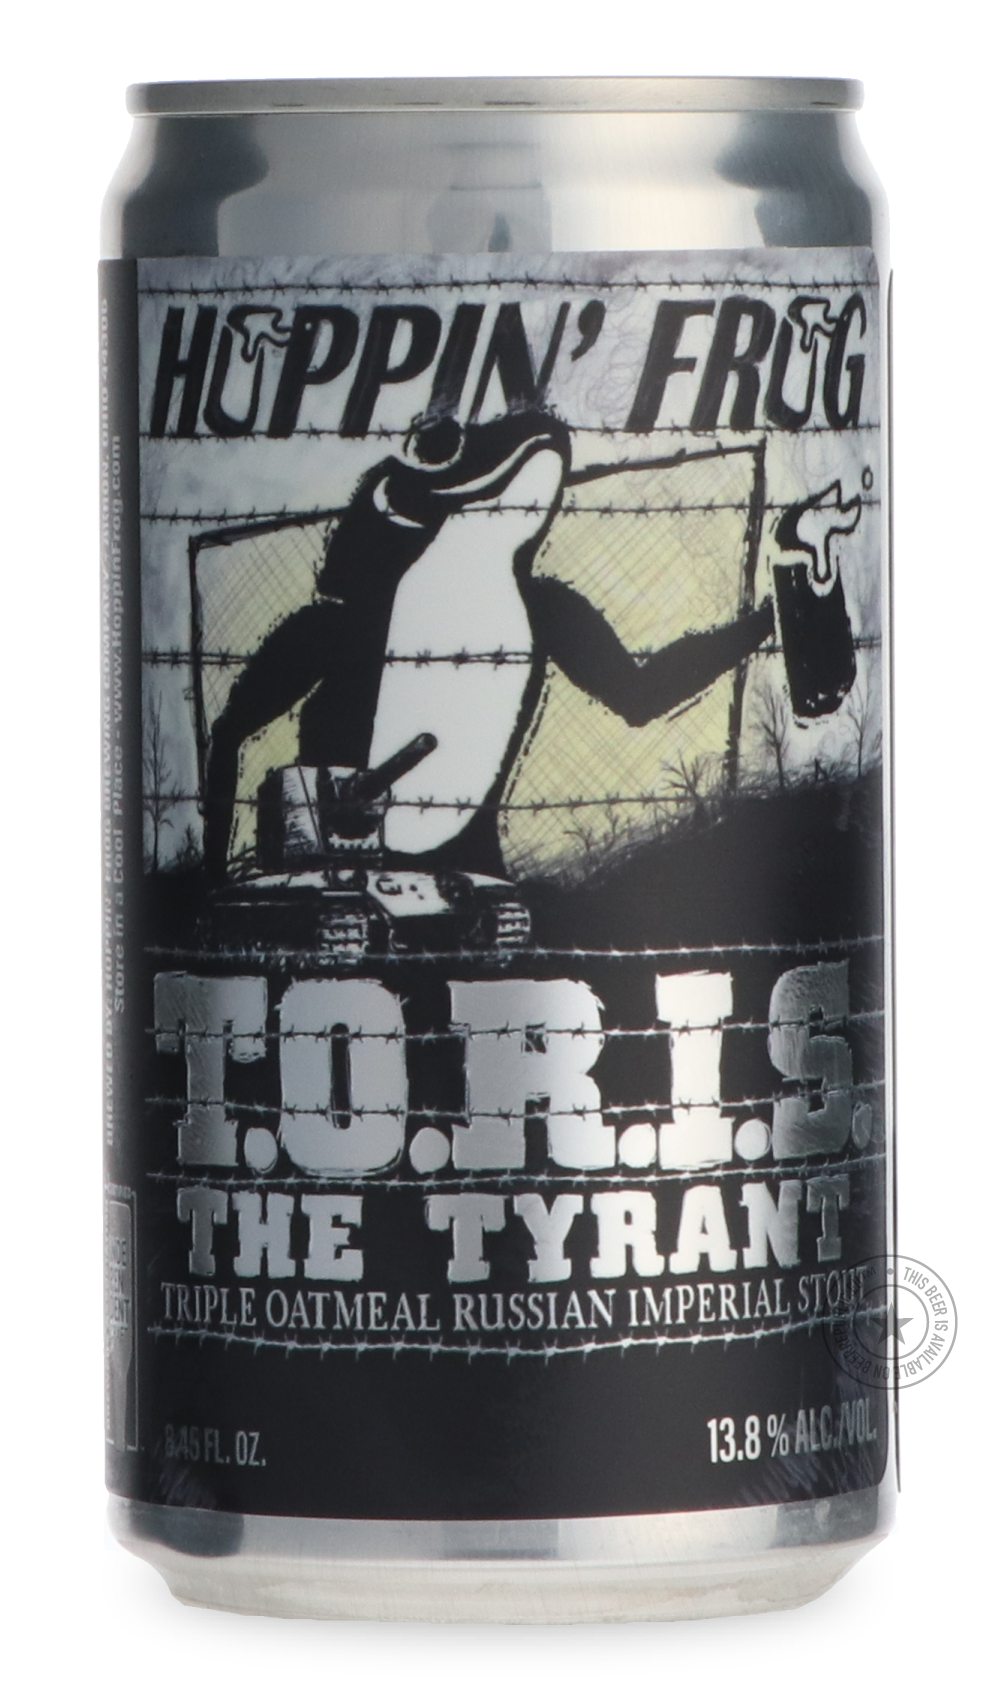 -Hoppin' Frog- T.O.R.I.S. The Tyrant-Stout & Porter- Only @ Beer Republic - The best online beer store for American & Canadian craft beer - Buy beer online from the USA and Canada - Bier online kopen - Amerikaans bier kopen - Craft beer store - Craft beer kopen - Amerikanisch bier kaufen - Bier online kaufen - Acheter biere online - IPA - Stout - Porter - New England IPA - Hazy IPA - Imperial Stout - Barrel Aged - Barrel Aged Imperial Stout - Brown - Dark beer - Blond - Blonde - Pilsner - Lager - Wheat - We